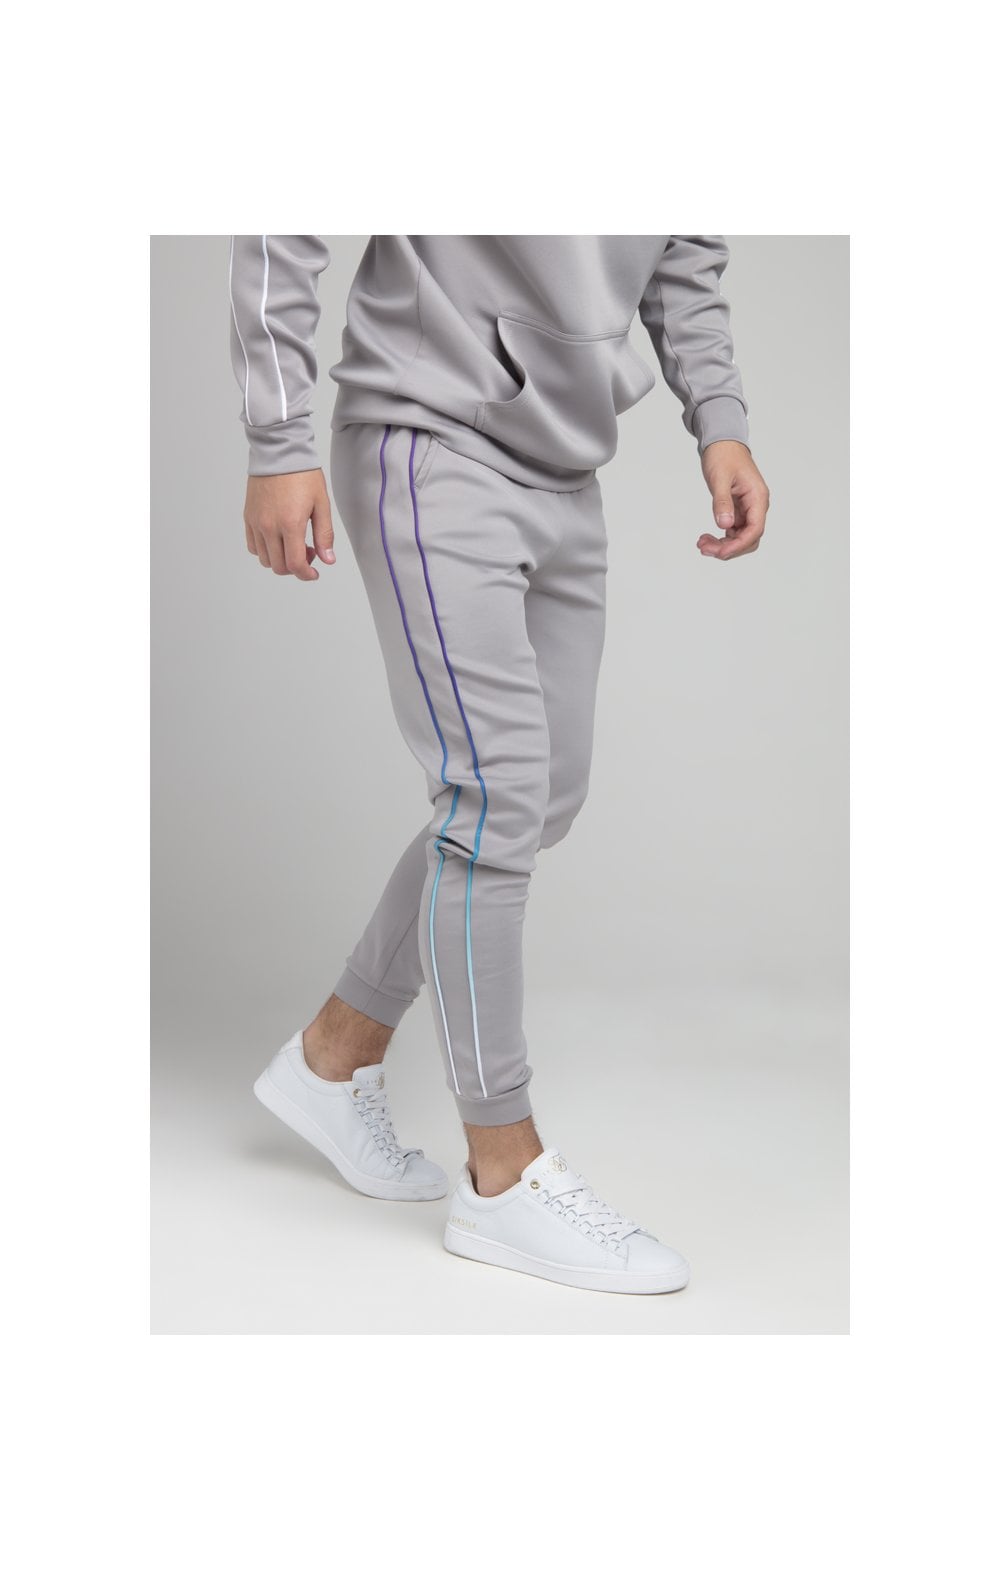 Illusive London Poly Piped Pants - Light Grey (1)